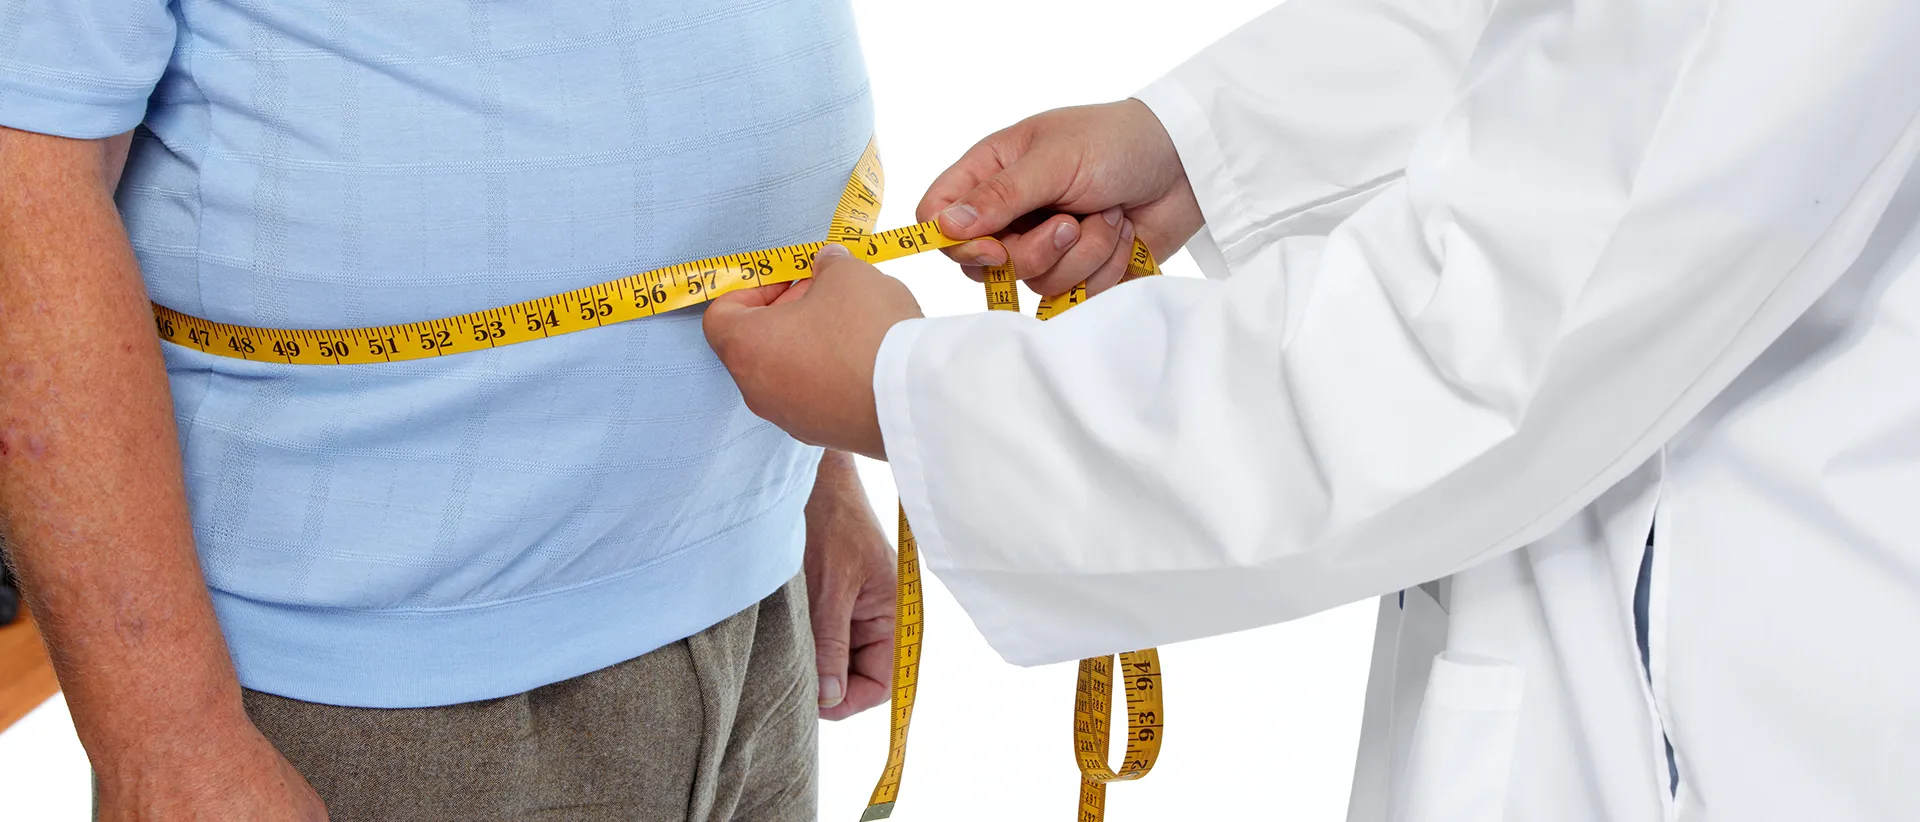 Big fat tummy of an obese man being measured by a doctor.